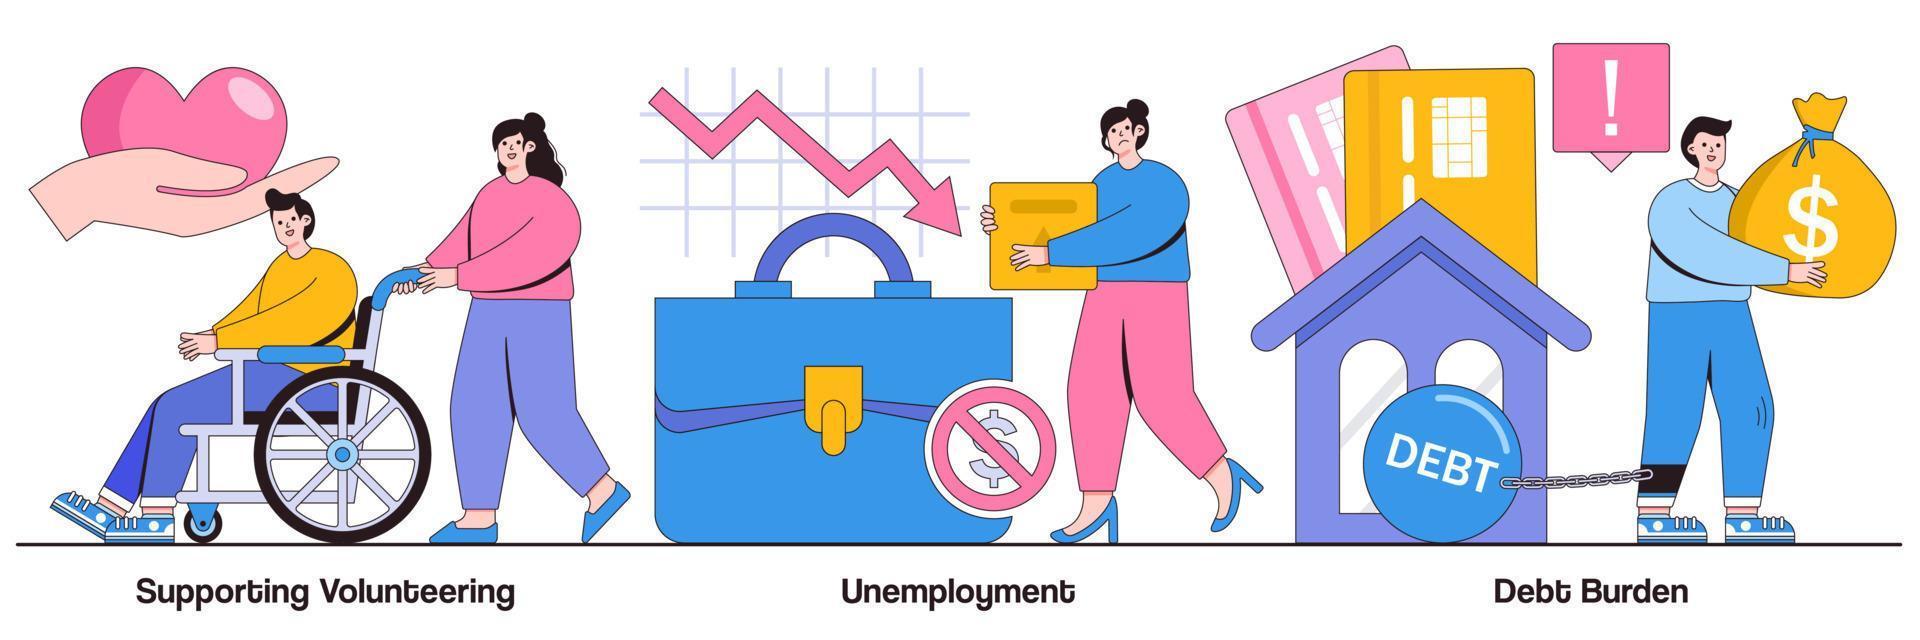 Supporting Volunteering, Unemployment, and Debt Burden Illustrated Pack vector